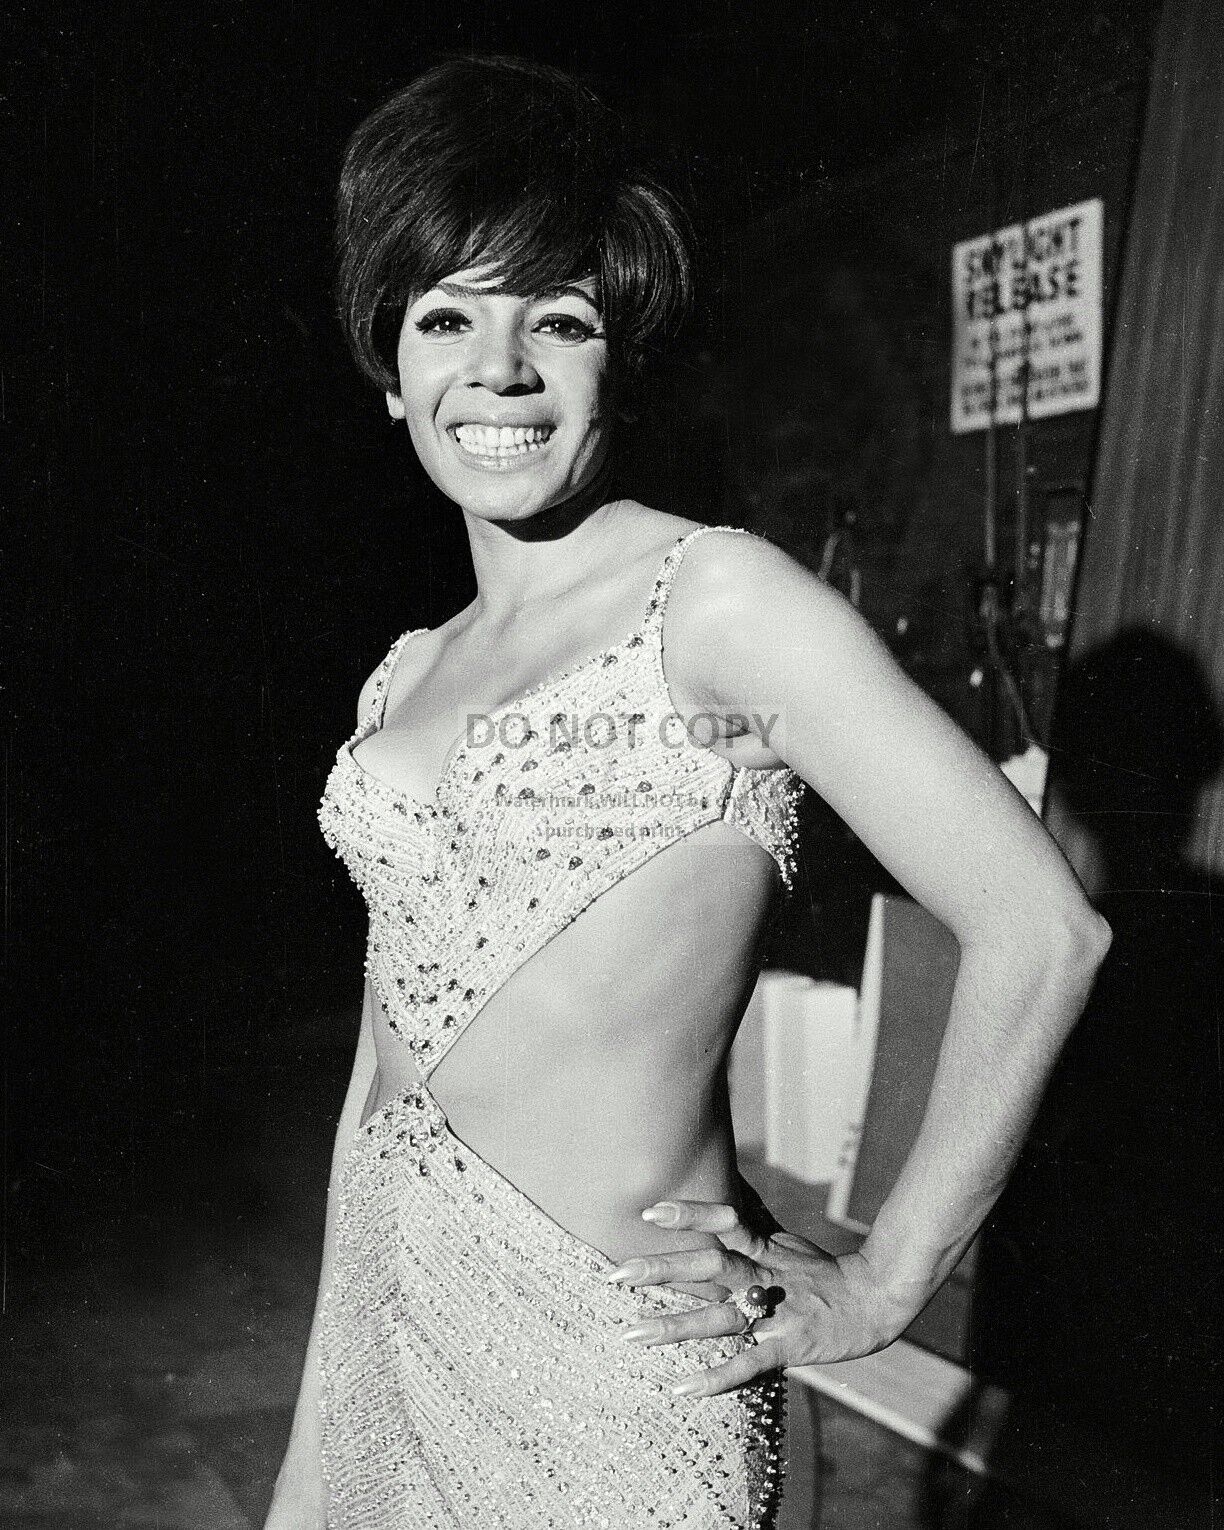 SINGER SHIRLEY BASSEY IN 1967 - 8X10 PUBLICITY PHOTO (AB-469)